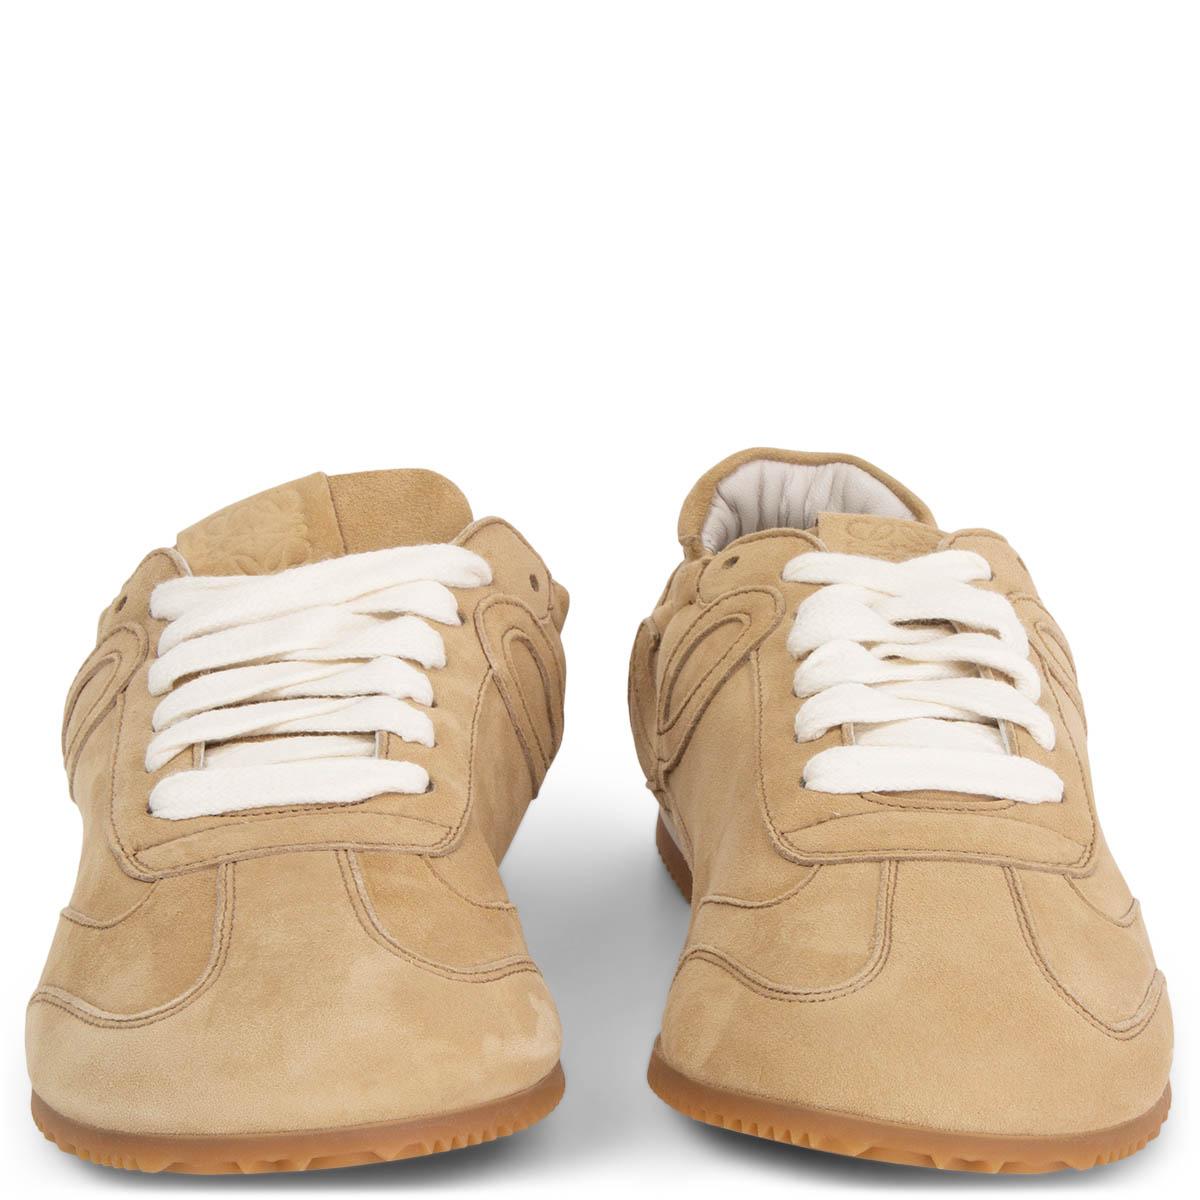 100% authentic LOEWE low-top Ballet Runner sneakers in beige suede and white laces. The design is set on a slim rubber sole. Brand new. 

Measurements
Imprinted Size	36
Shoe Size	36
Inside Sole	23cm (9in)
Width	7cm (2.7in)

All our listings include